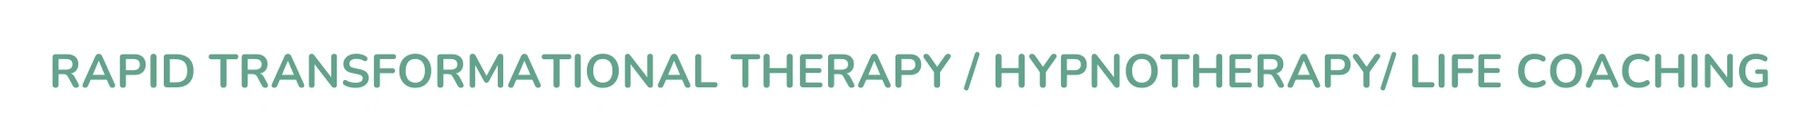 Rapid Transformational Therapy
Hypnotherapy
Coaching